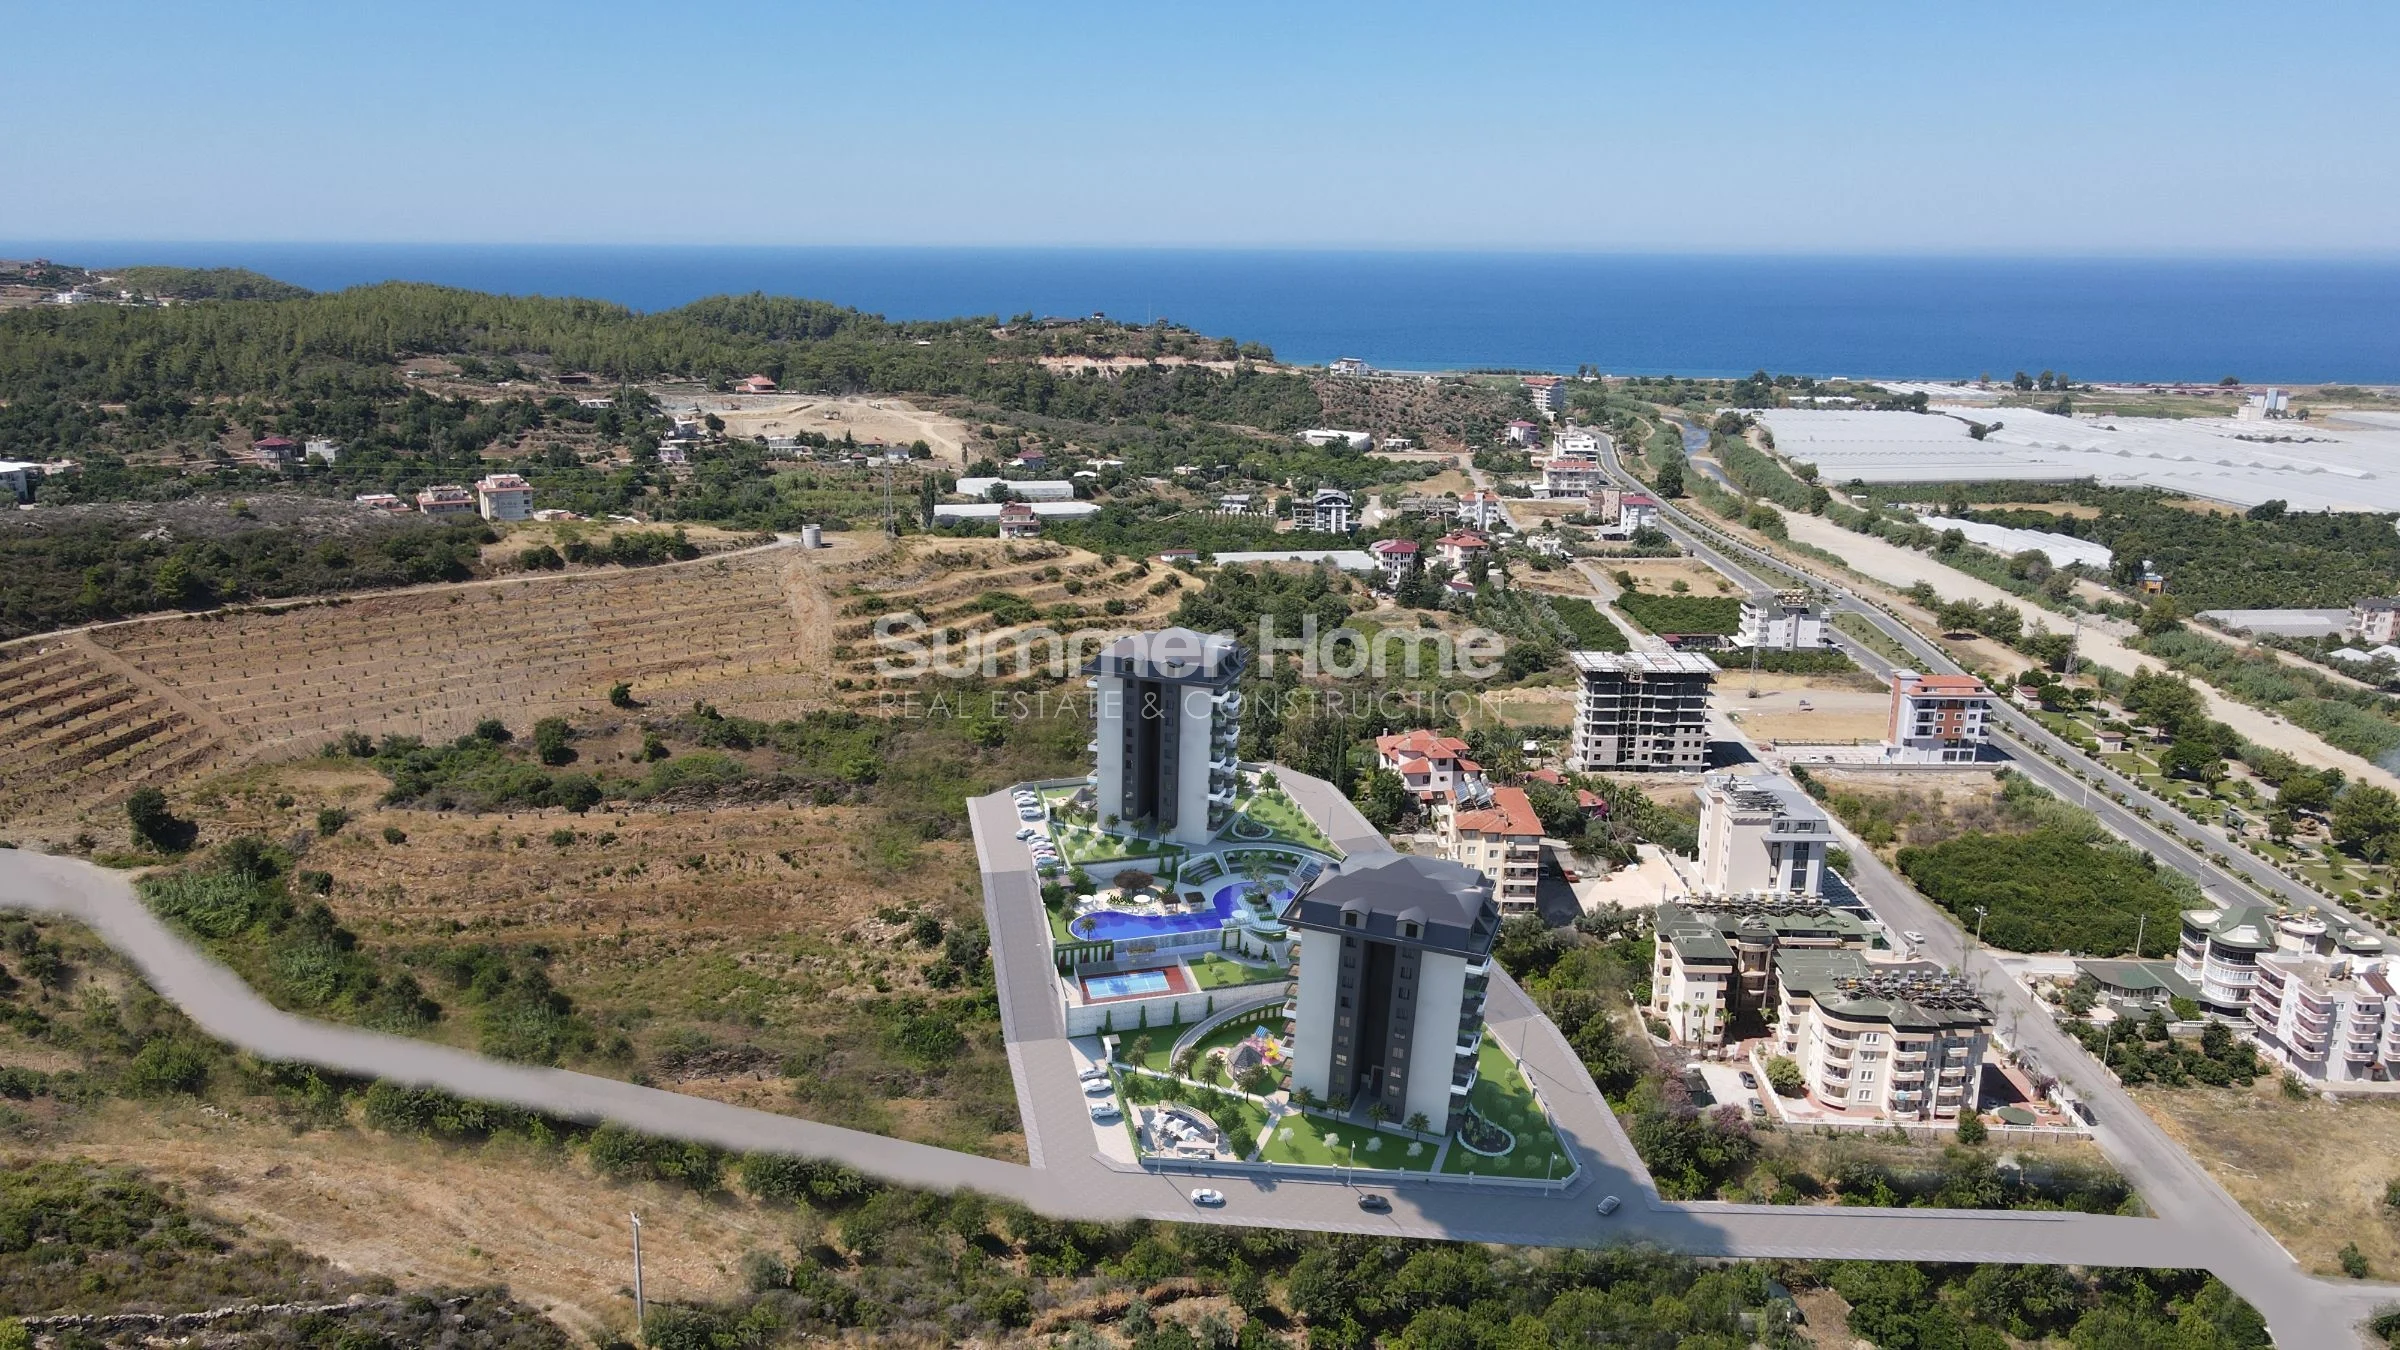 Attractive Apartments in Stunning Complex in Demirtas General - 32